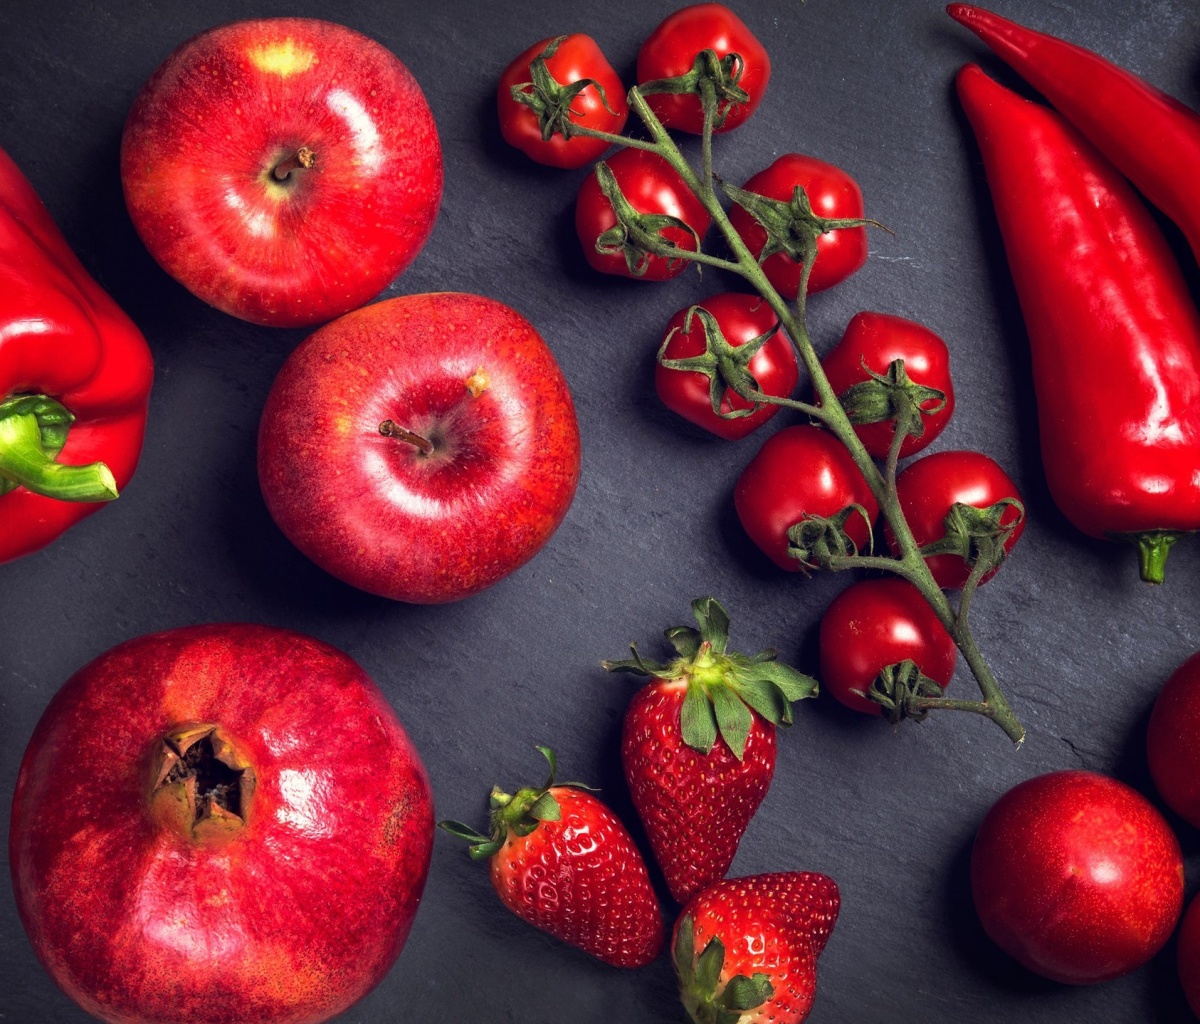 Red fruits and vegetables screenshot #1 1200x1024